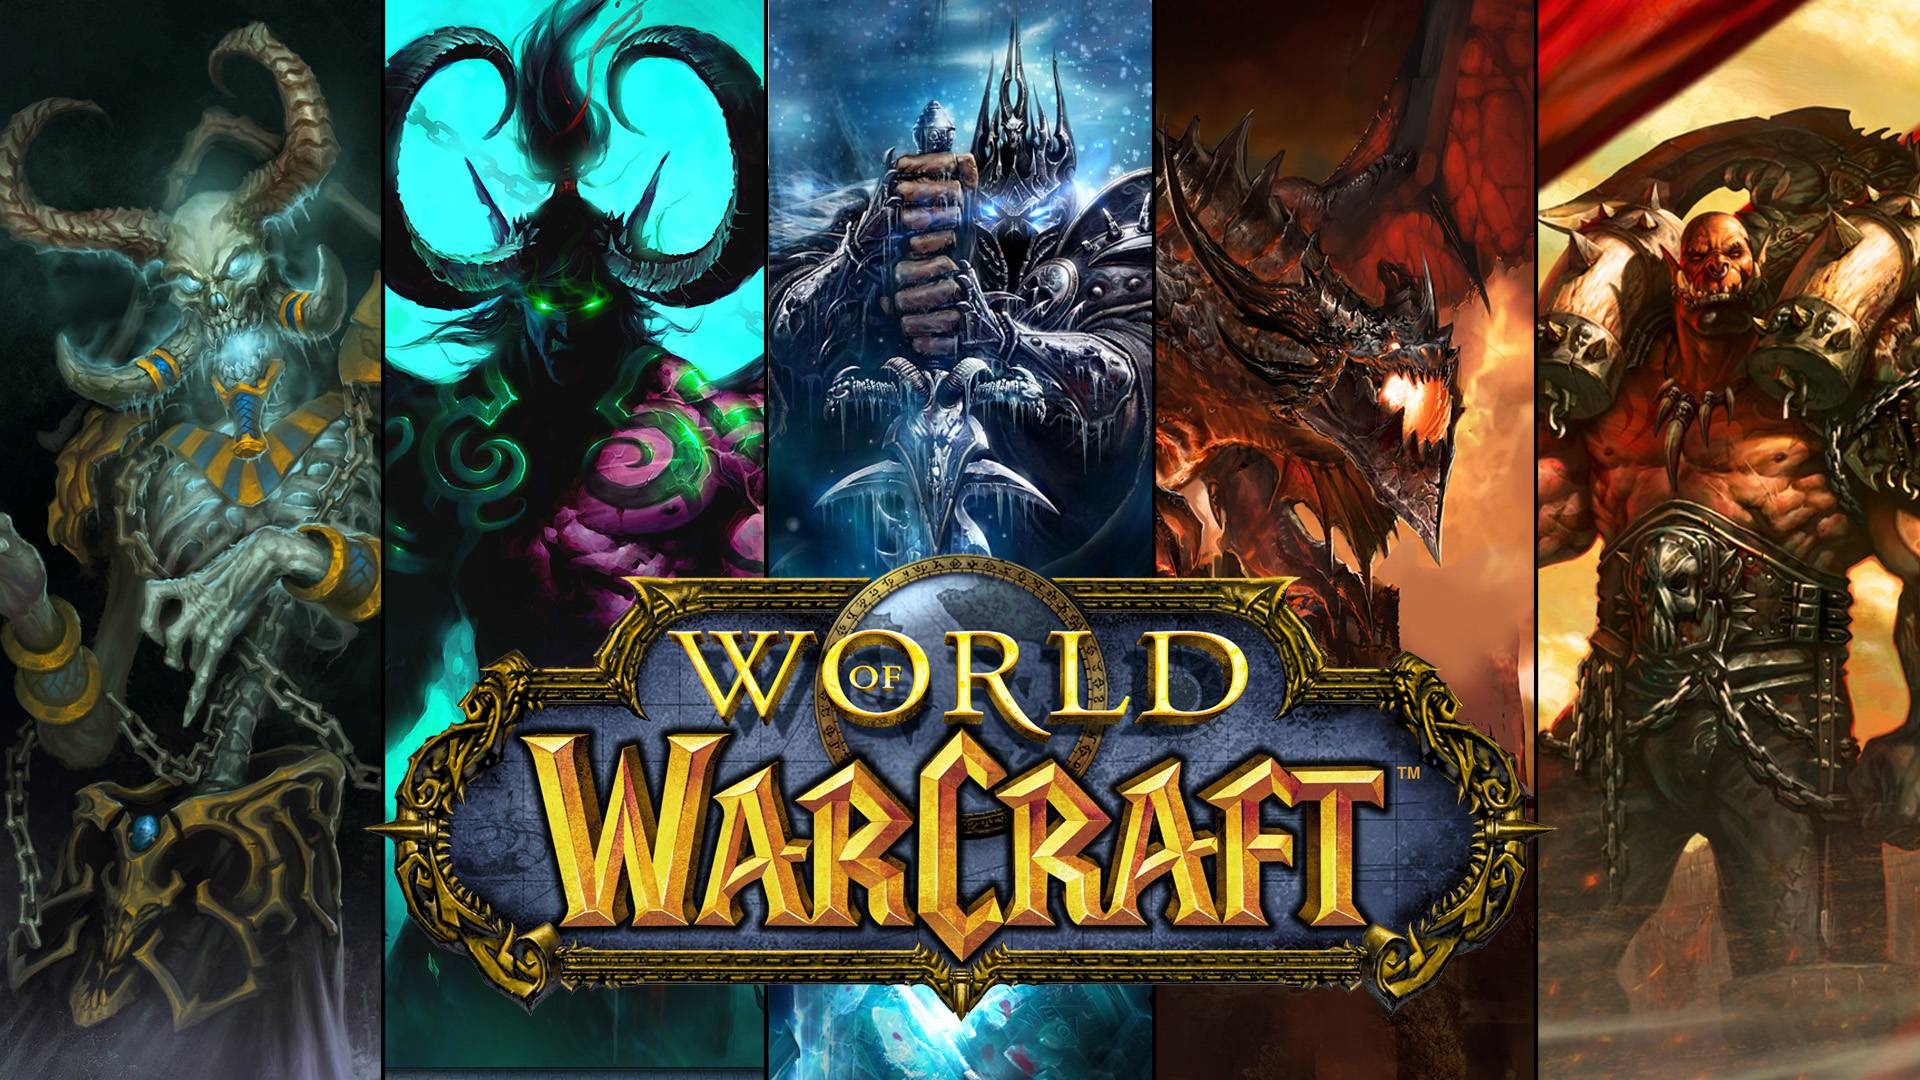 Welcome to the World of Warcraft